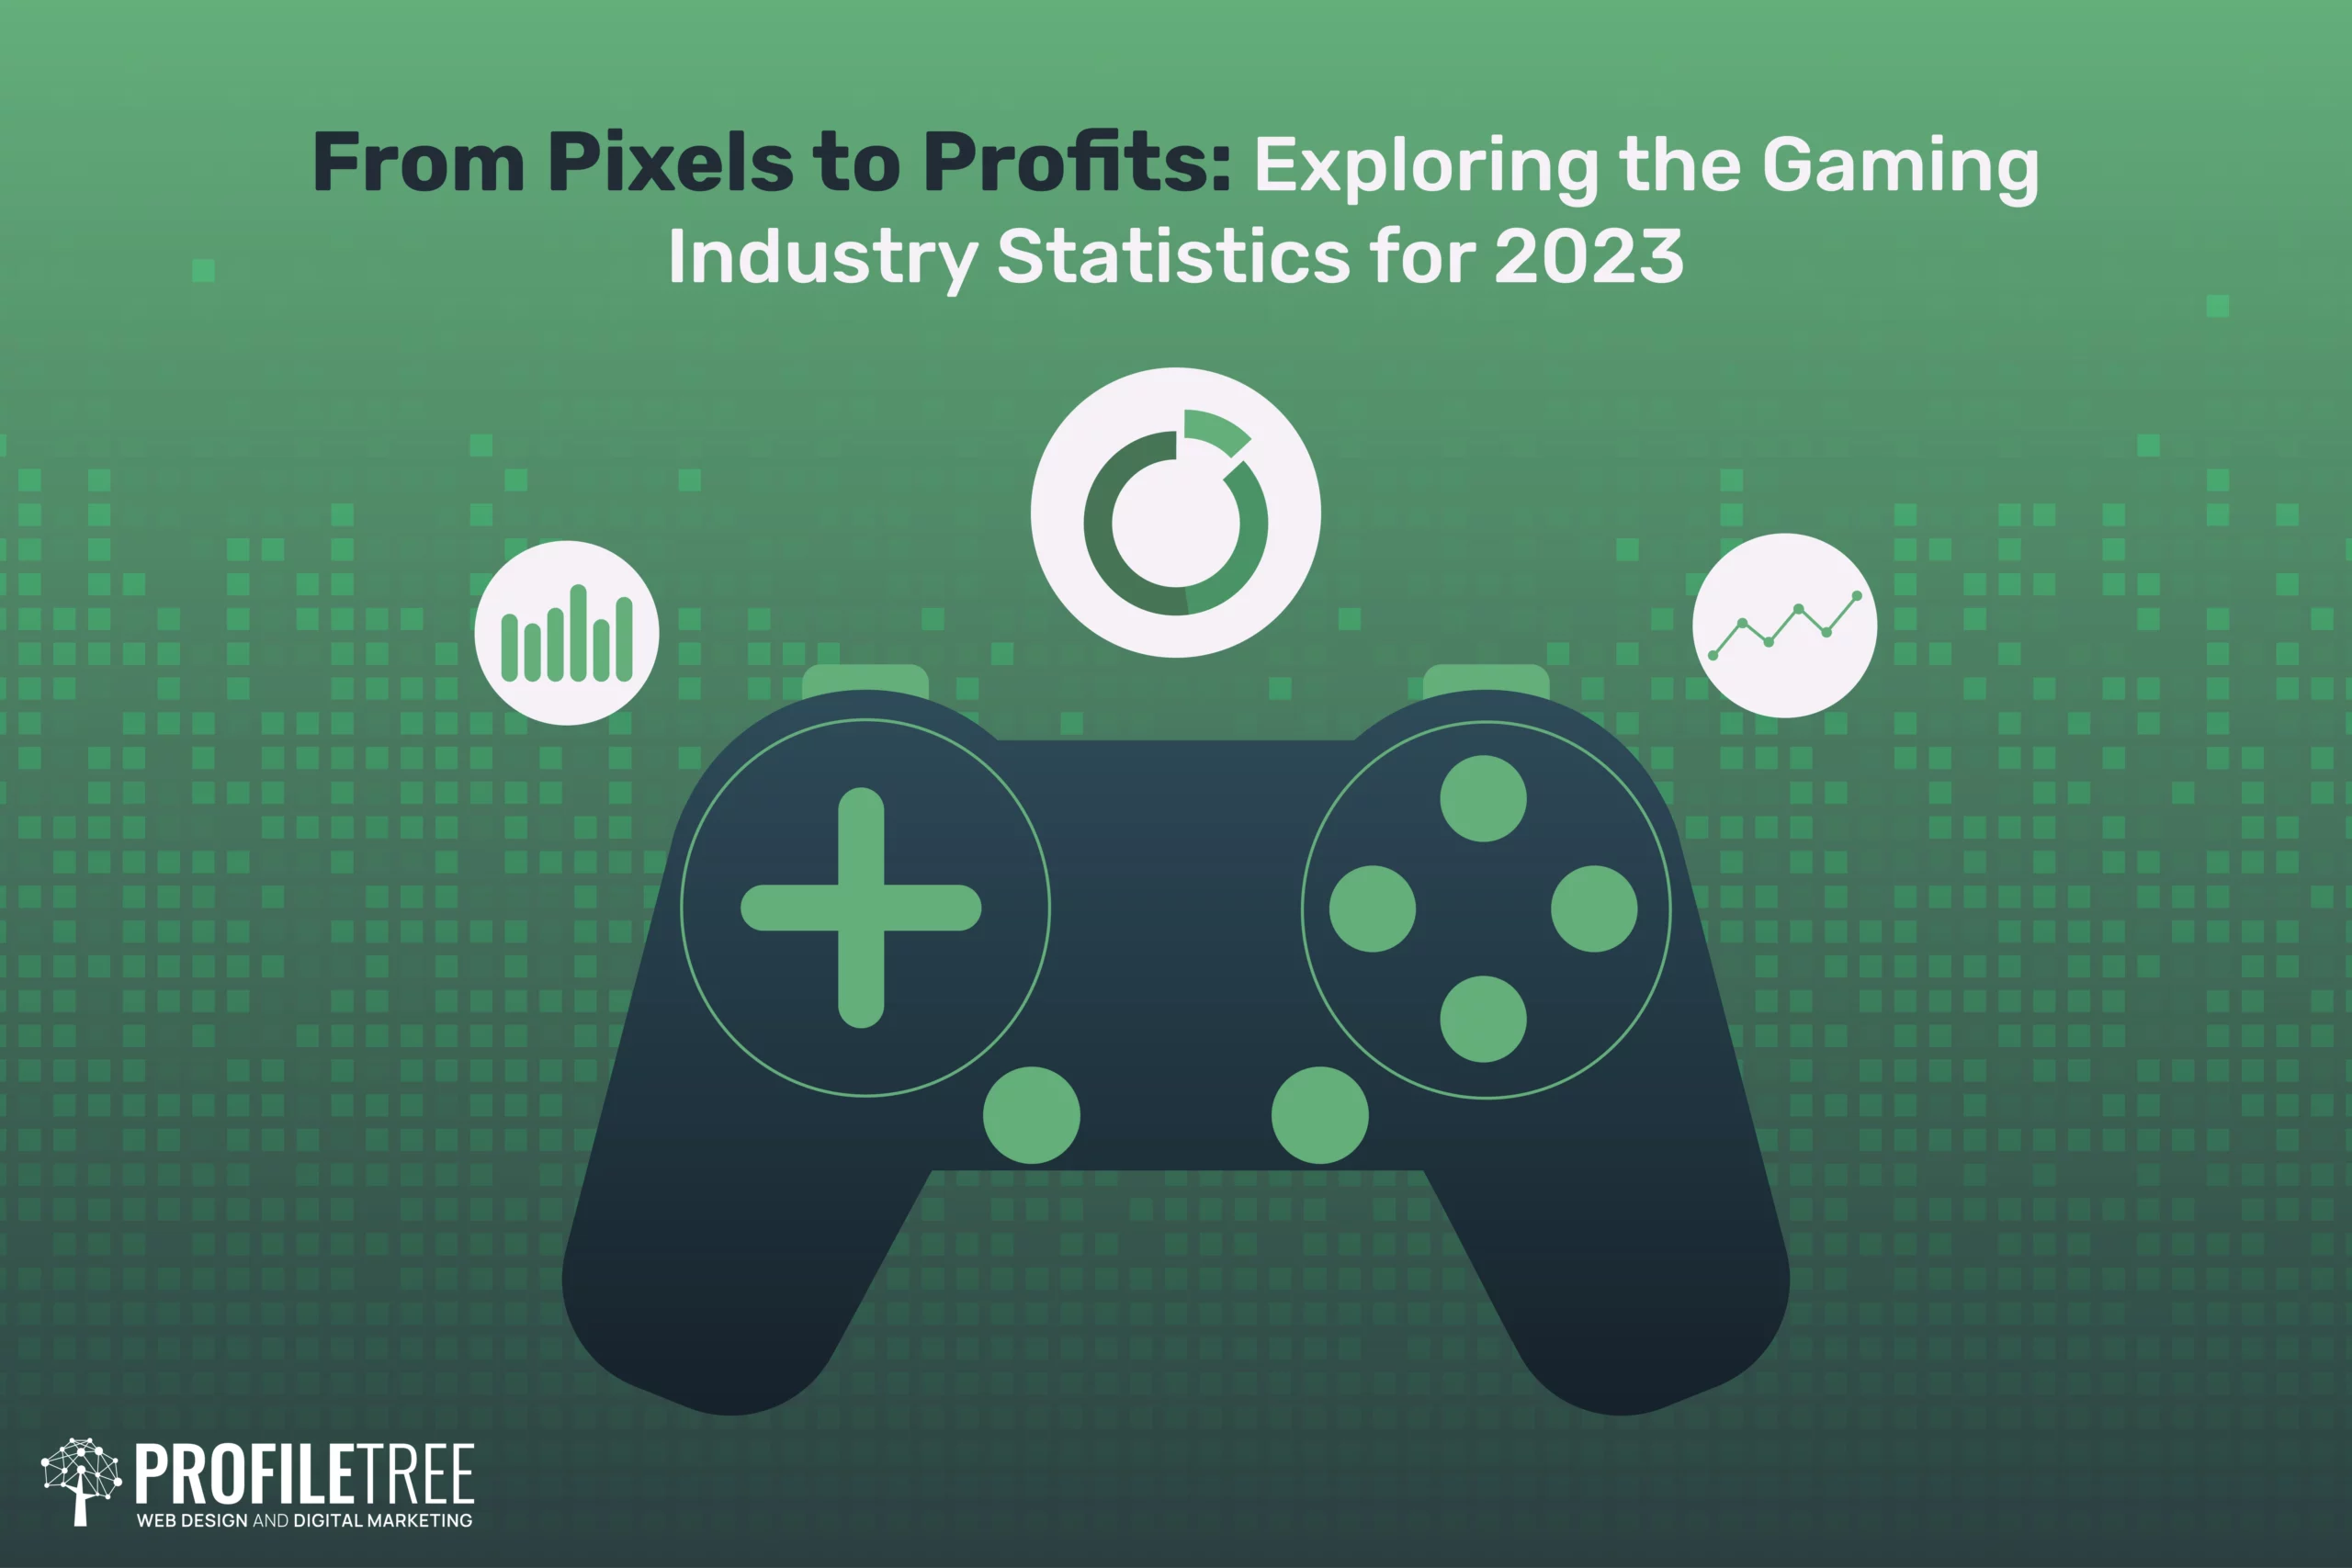 From Pixels to Profits Exploring the Gaming Industry Statistics for 2023